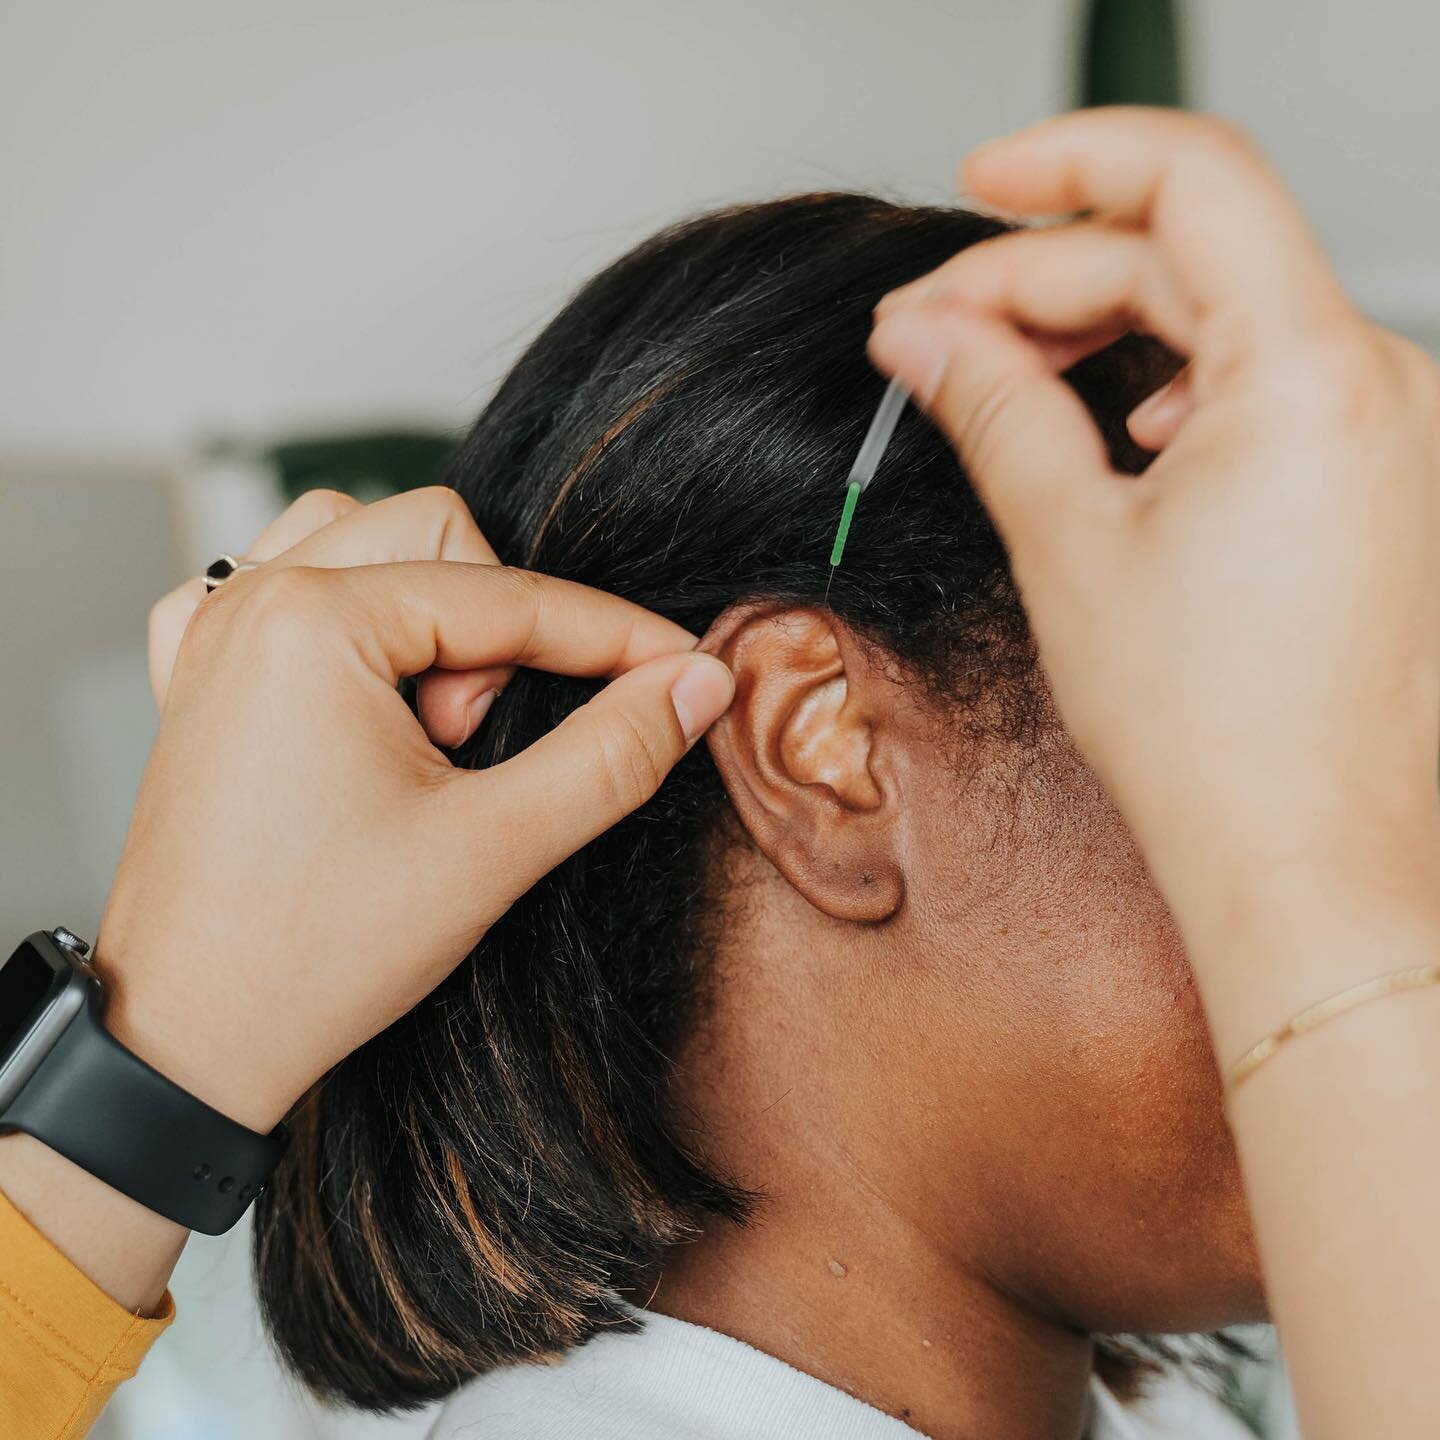 👂Acupuncture at my ears!? Say what!!! 
👂🏾Ear Acupuncture or Auriculotherapy can be used to treat the whole body. There is an entire microsystem on the ear that can be used in treatments. 
👂🏻 You may have experienced needles at your ear during se